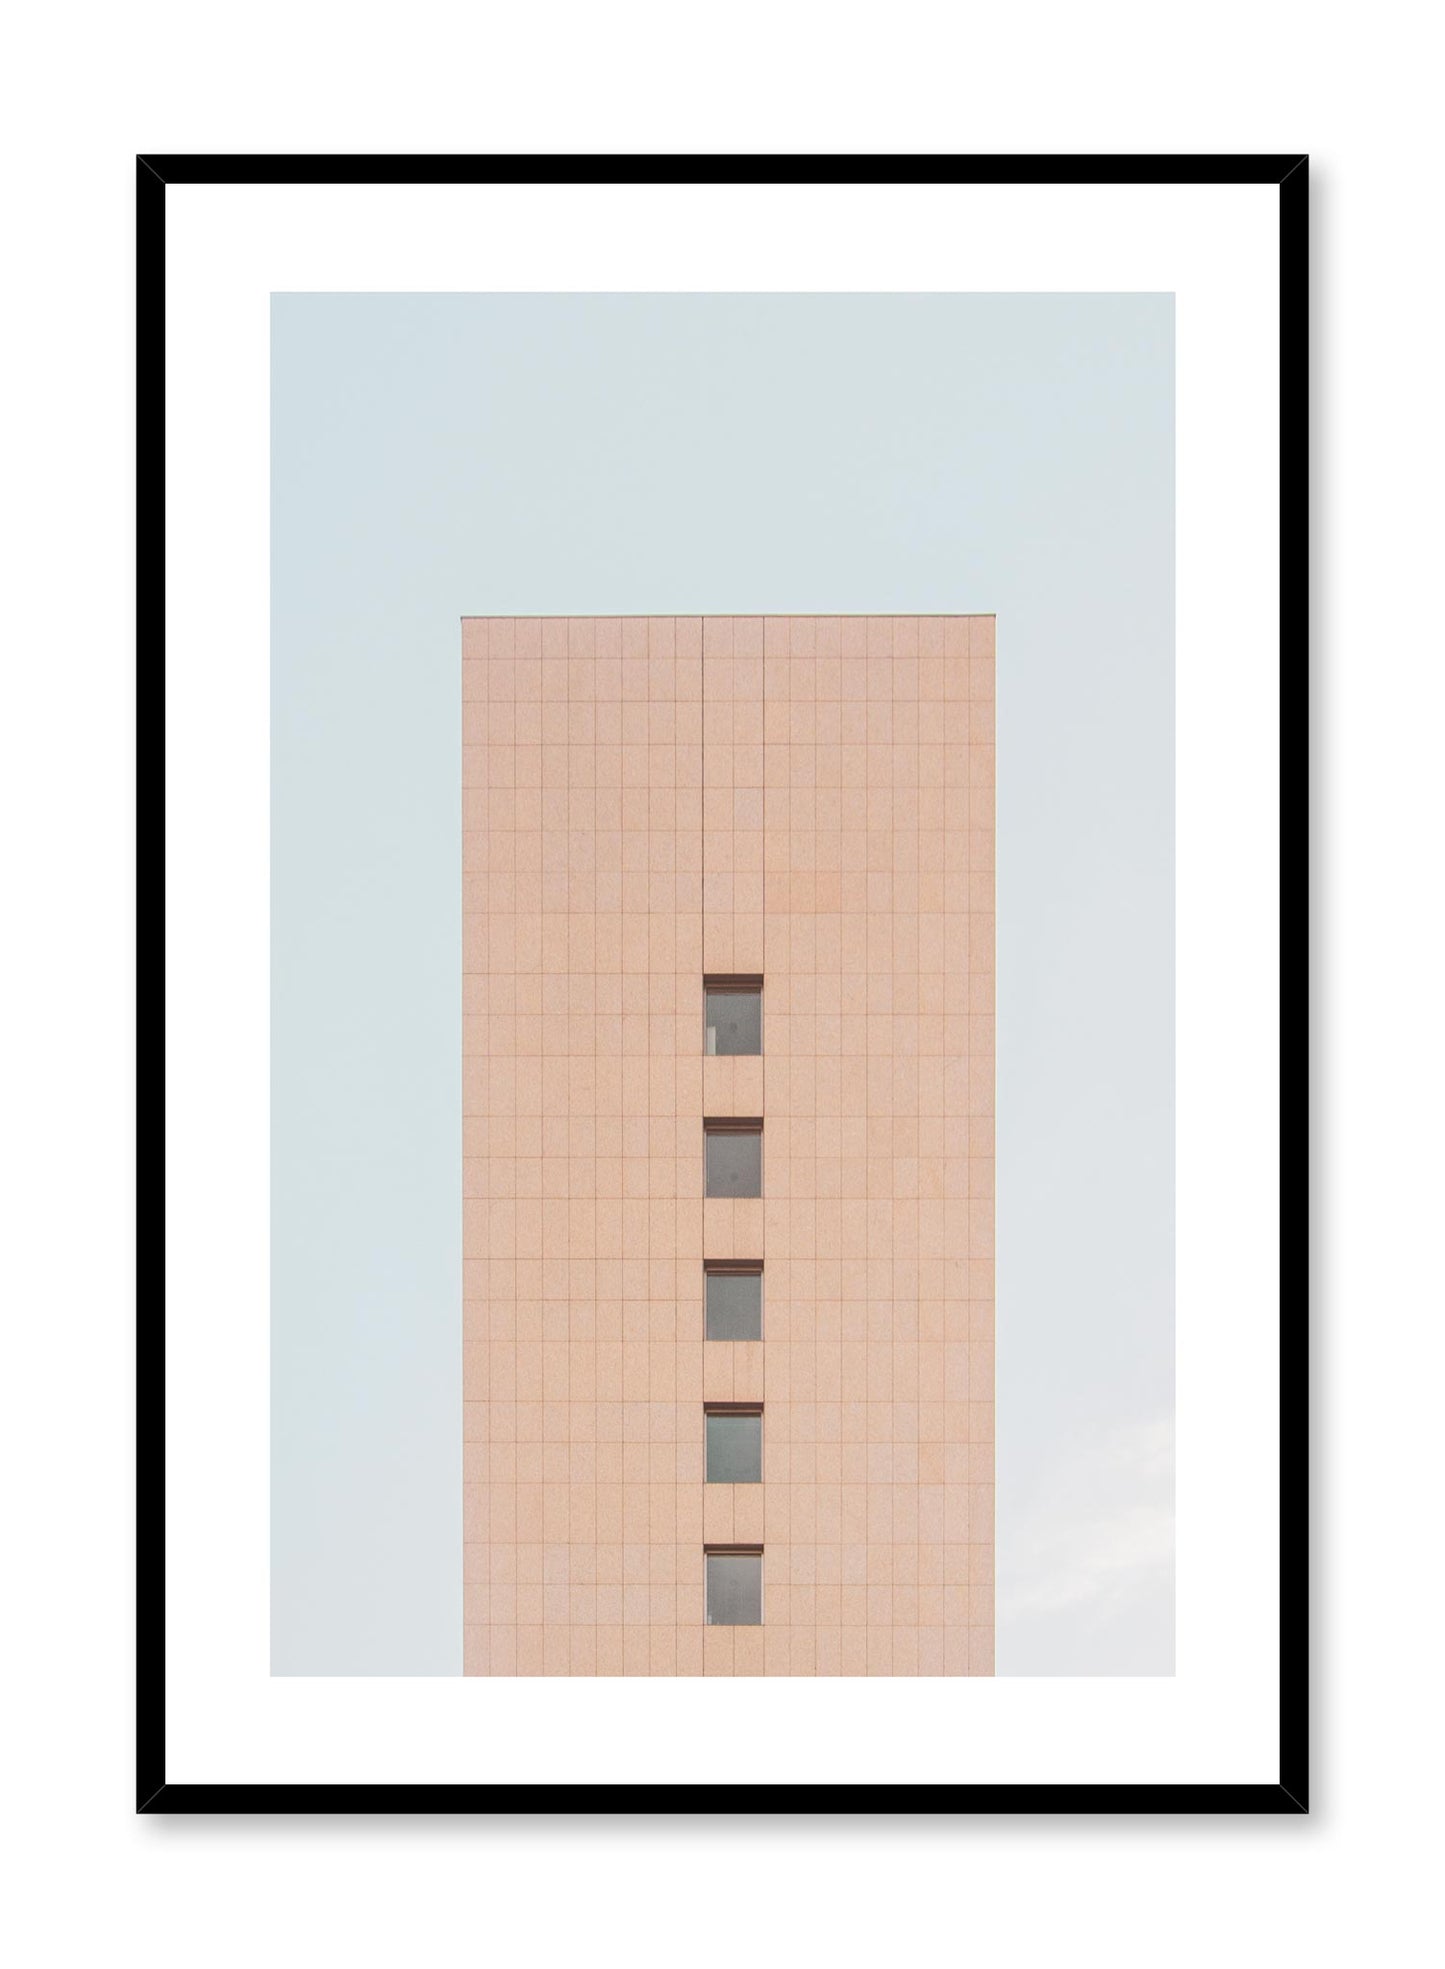 Minimalist design poster by Opposite Wall with urban photography of high rise building